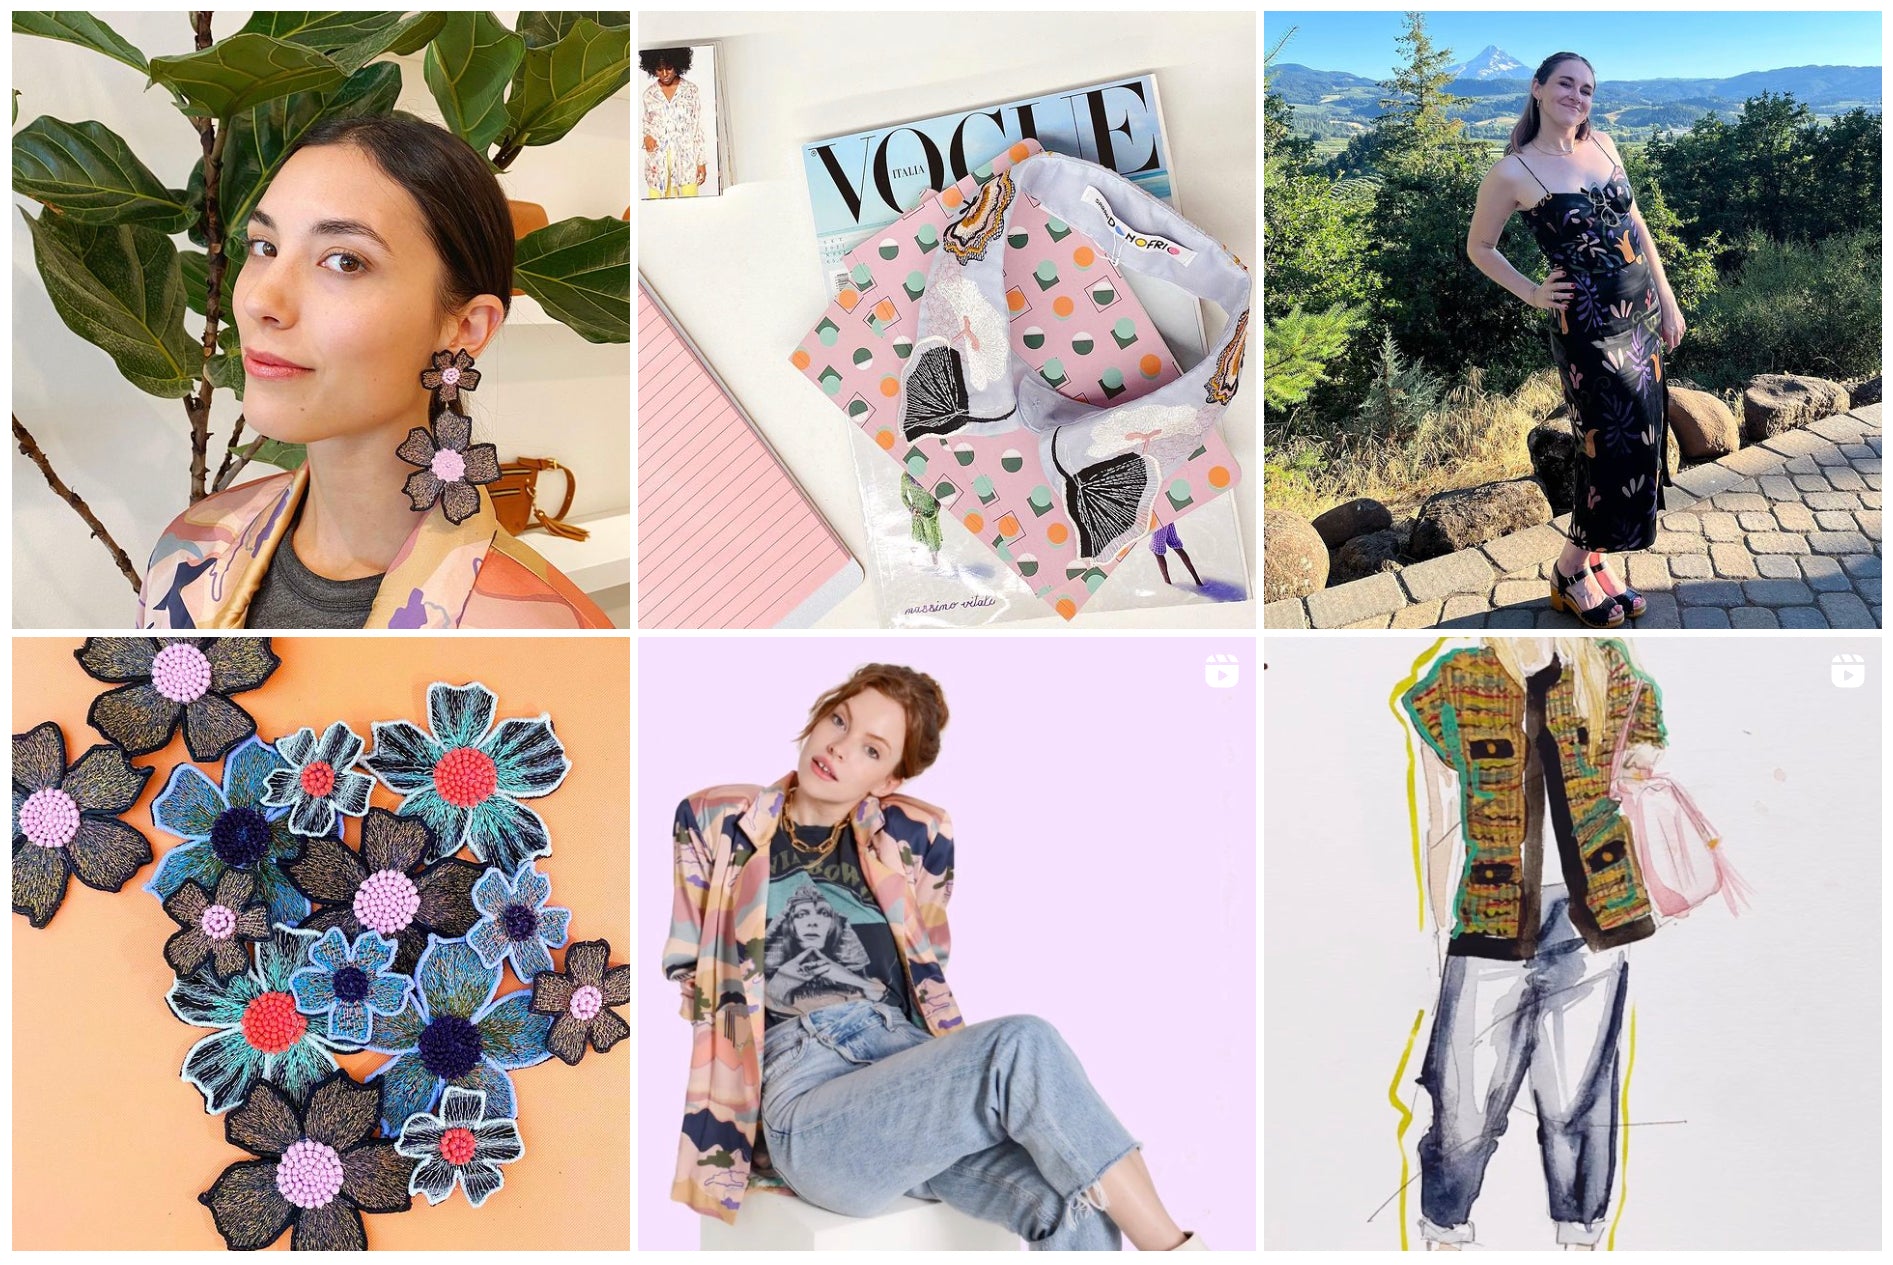 A grid of Instagram photos for a fashion brand